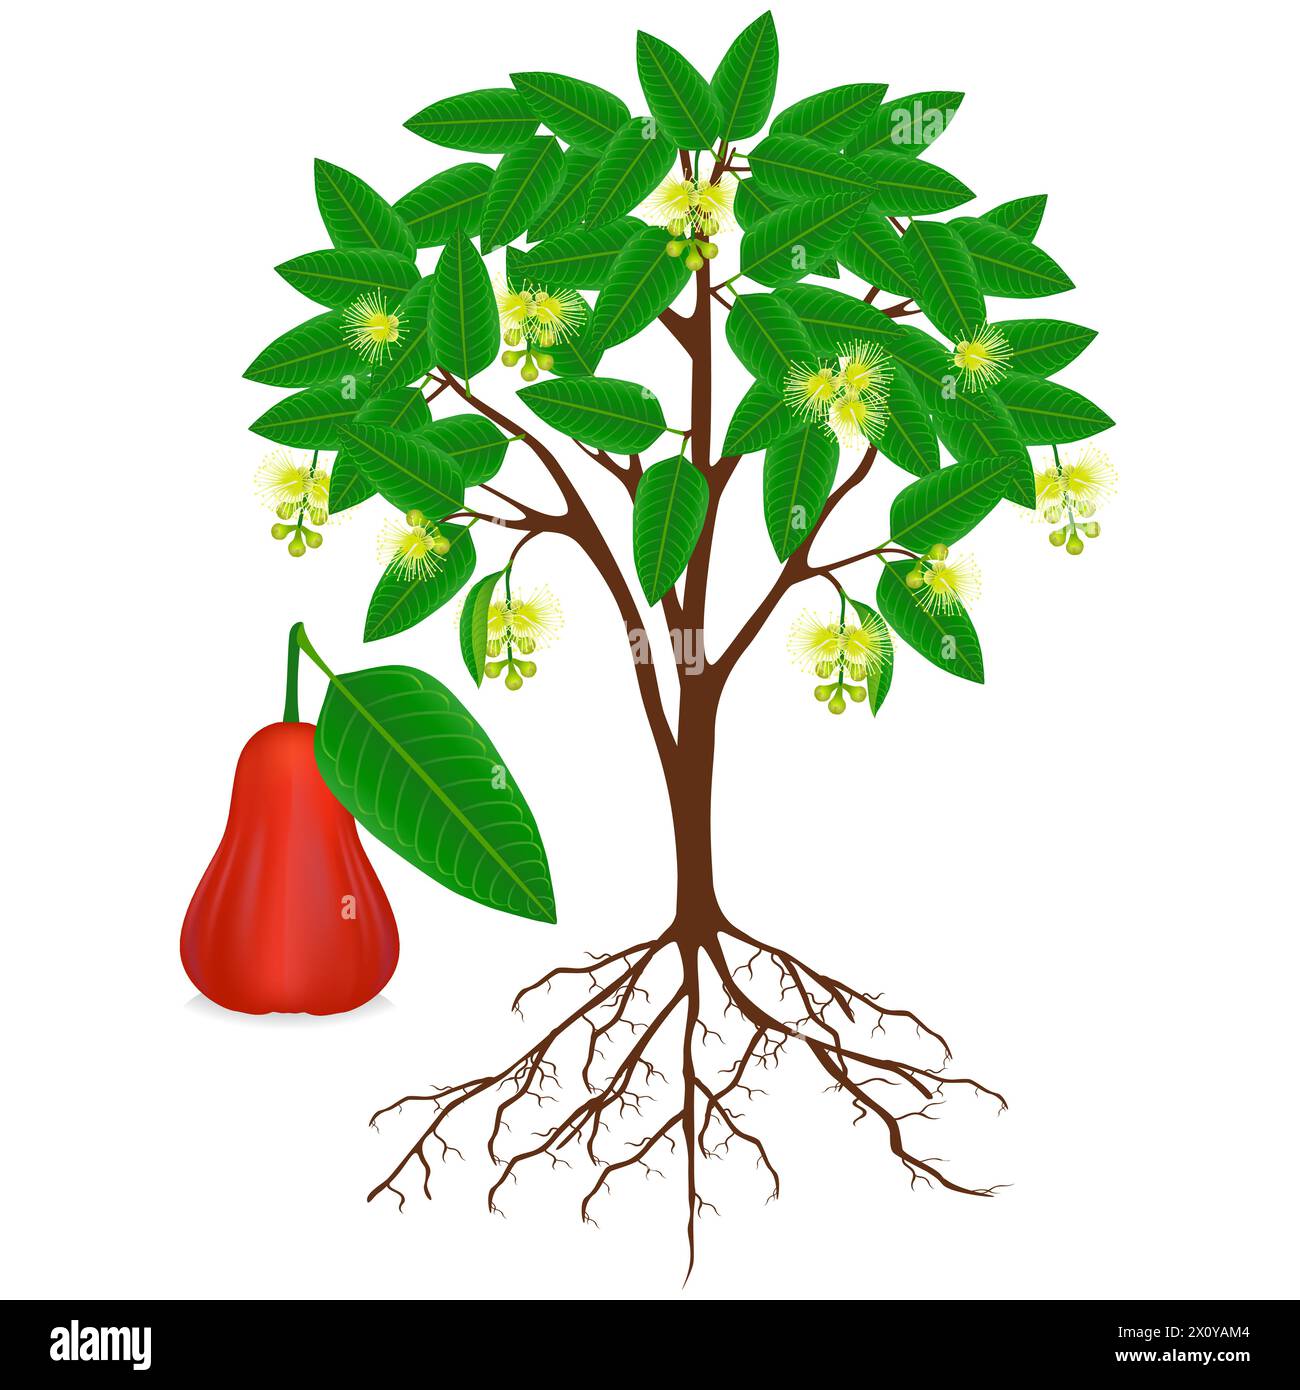 Syzygium jambos or rose apple plant with fruit and flowers. Stock Vector